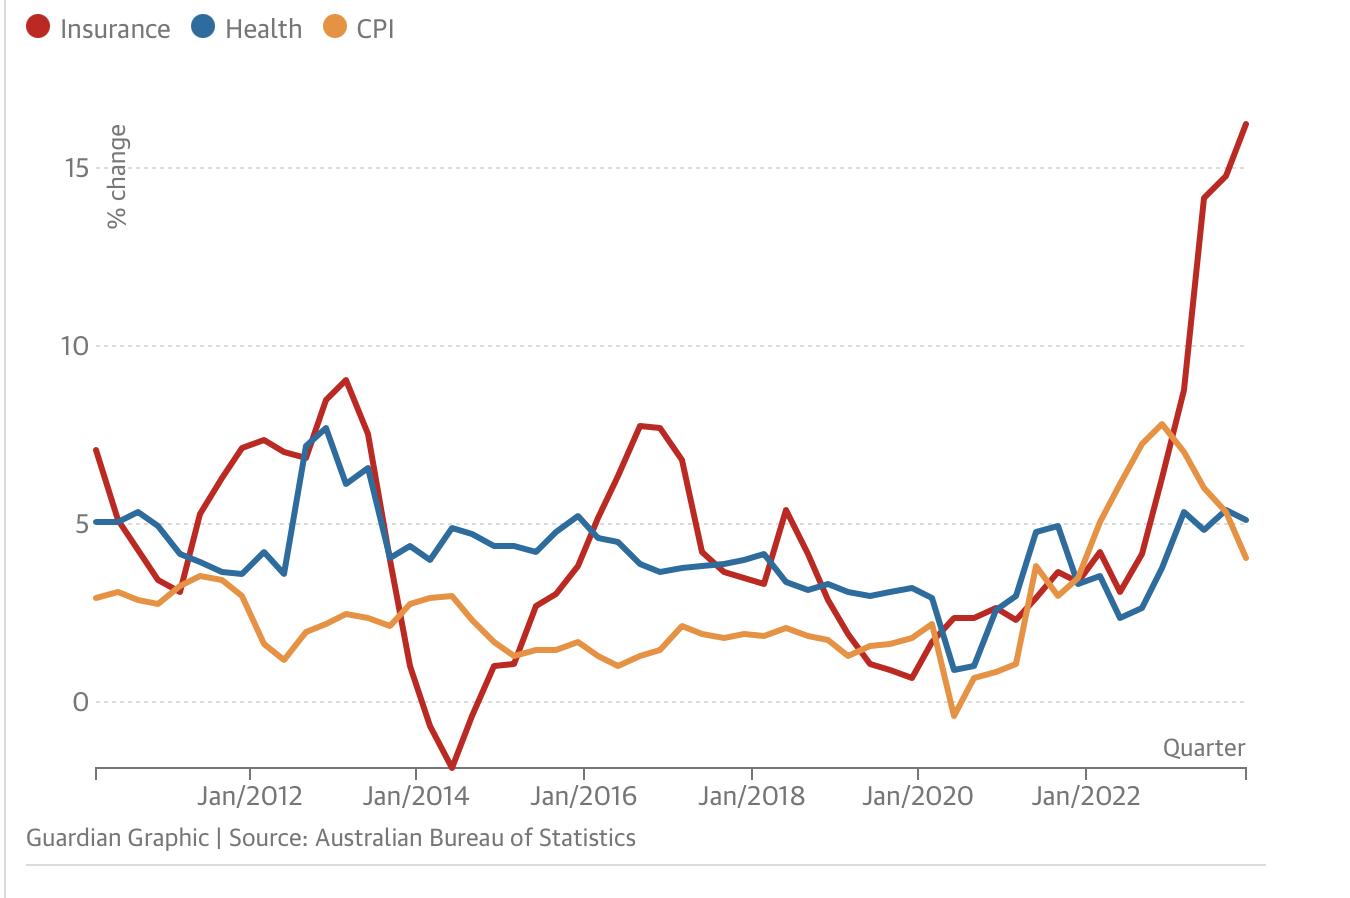 percentage change in CPI versus insurance and health costs.